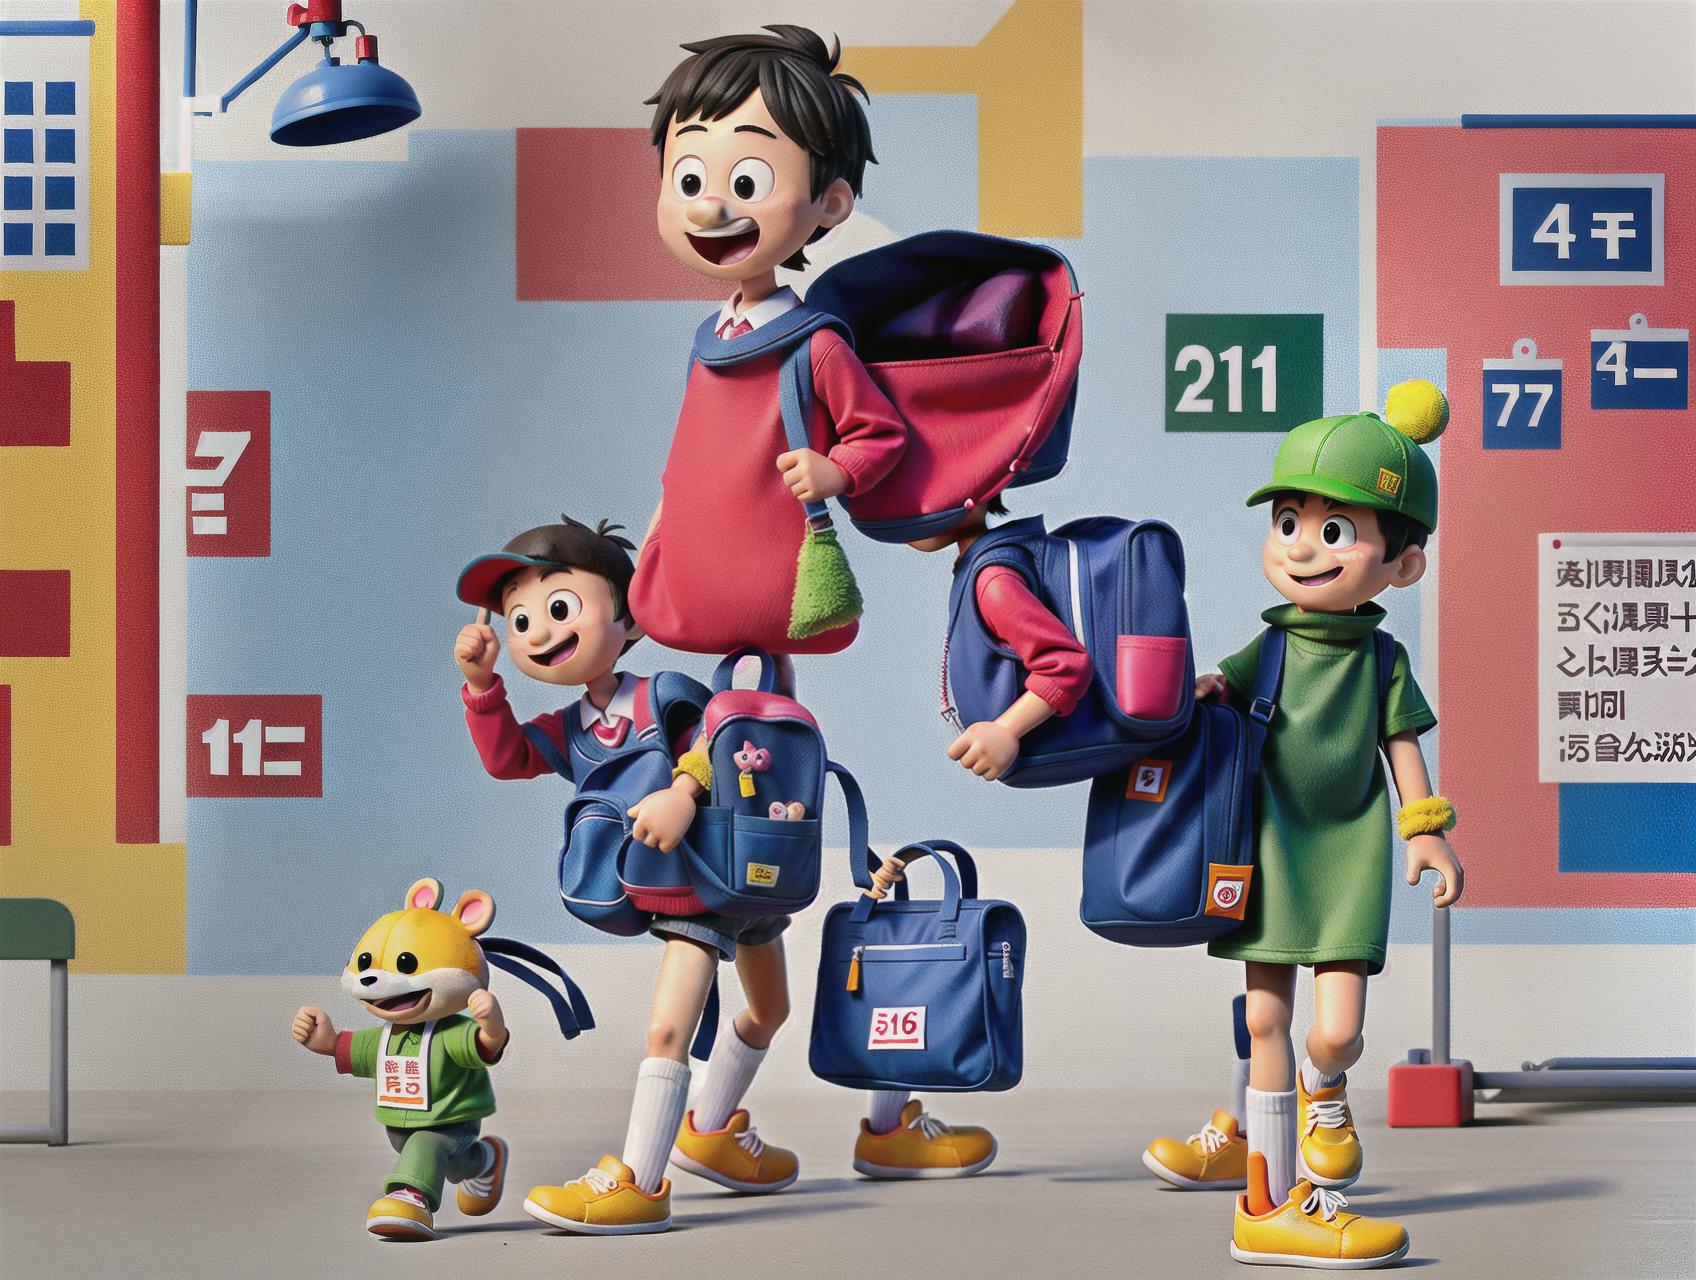  mascot, mascot wearing kindergarten uniform, mascot holding a small schoolbag, mascot body, printed with Dafeng experimental kindergarten and the number 10